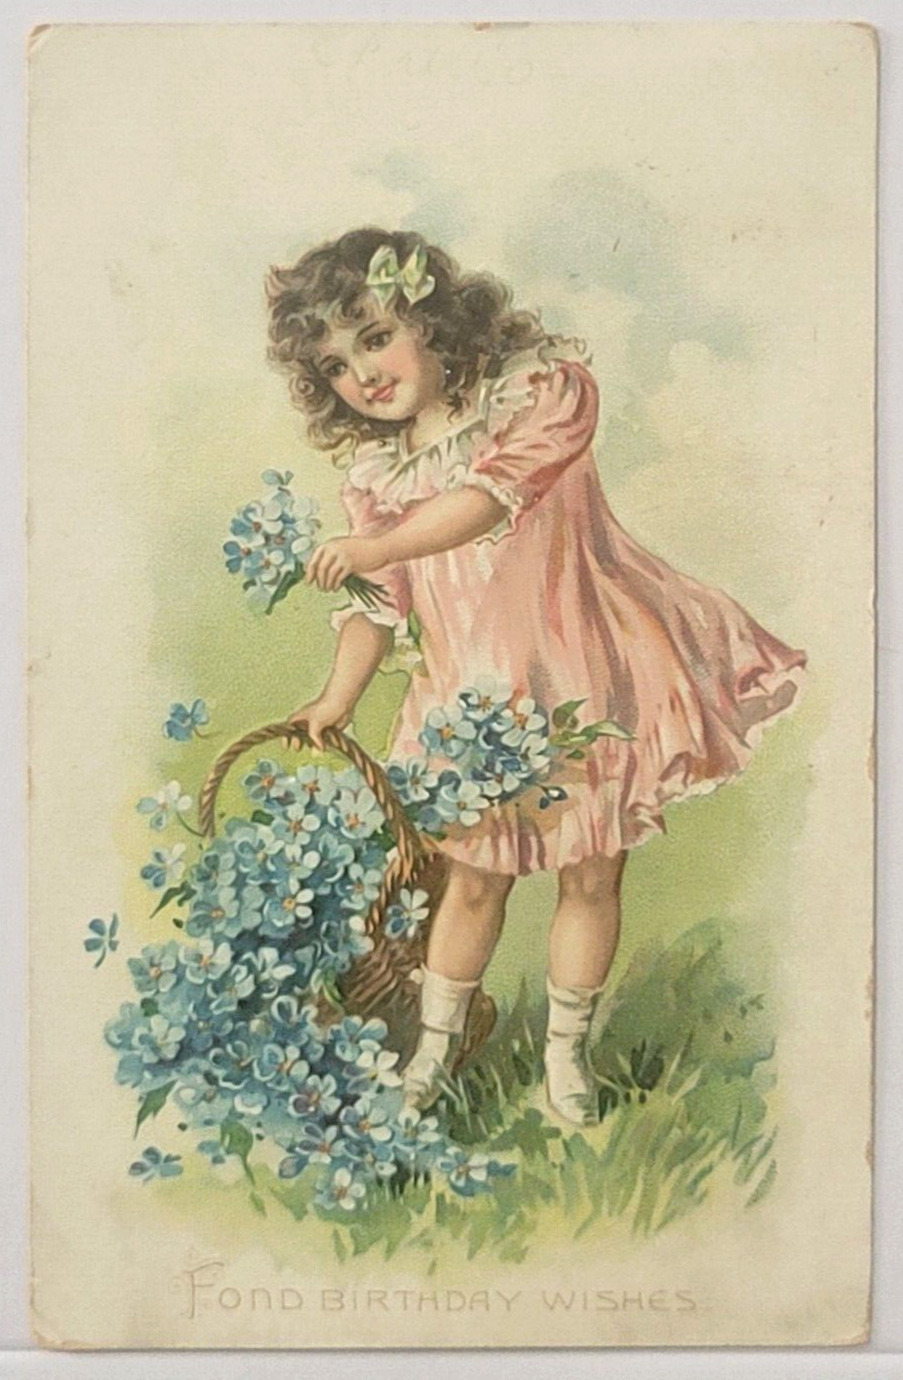 Postcard Fond Birthday Wishes Flower Basket Girl Posted 1910  Embossed Antique